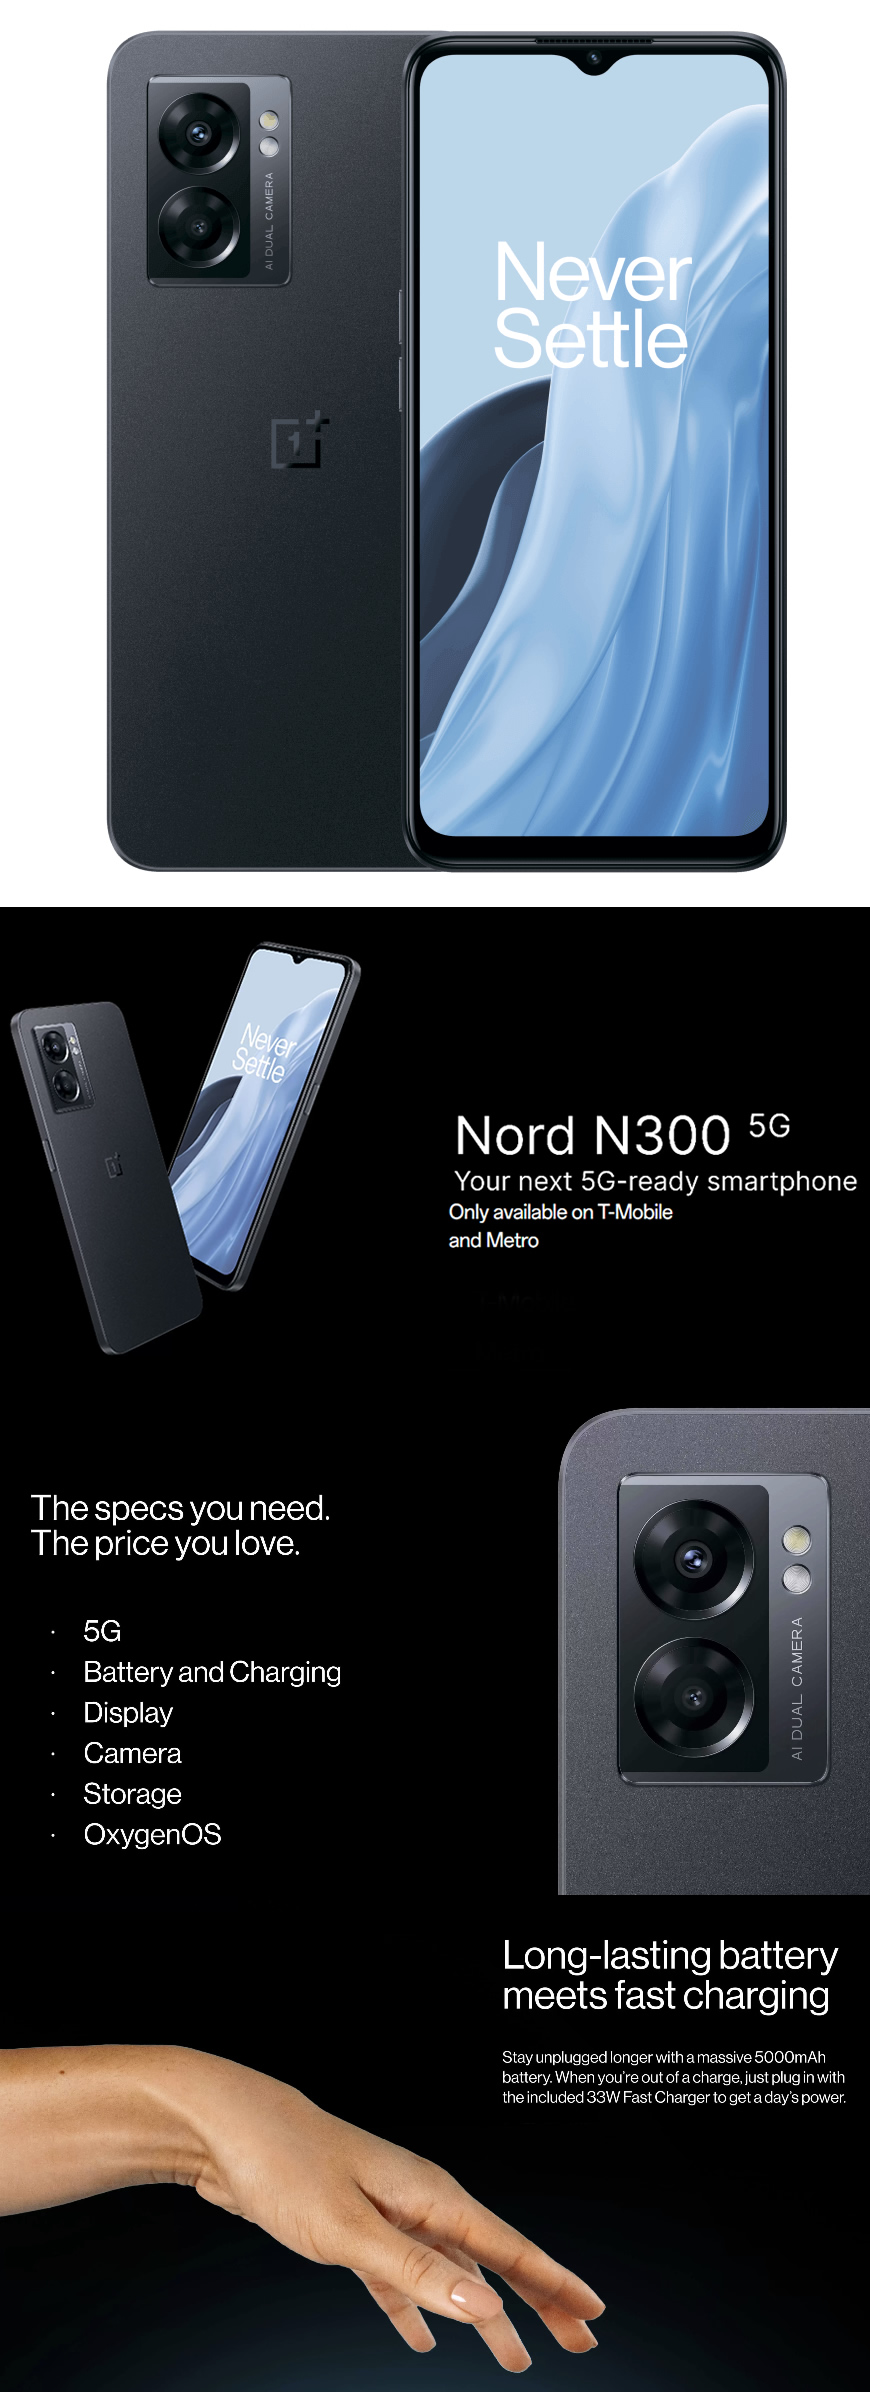 OnePlus Nord N300 5G images and features